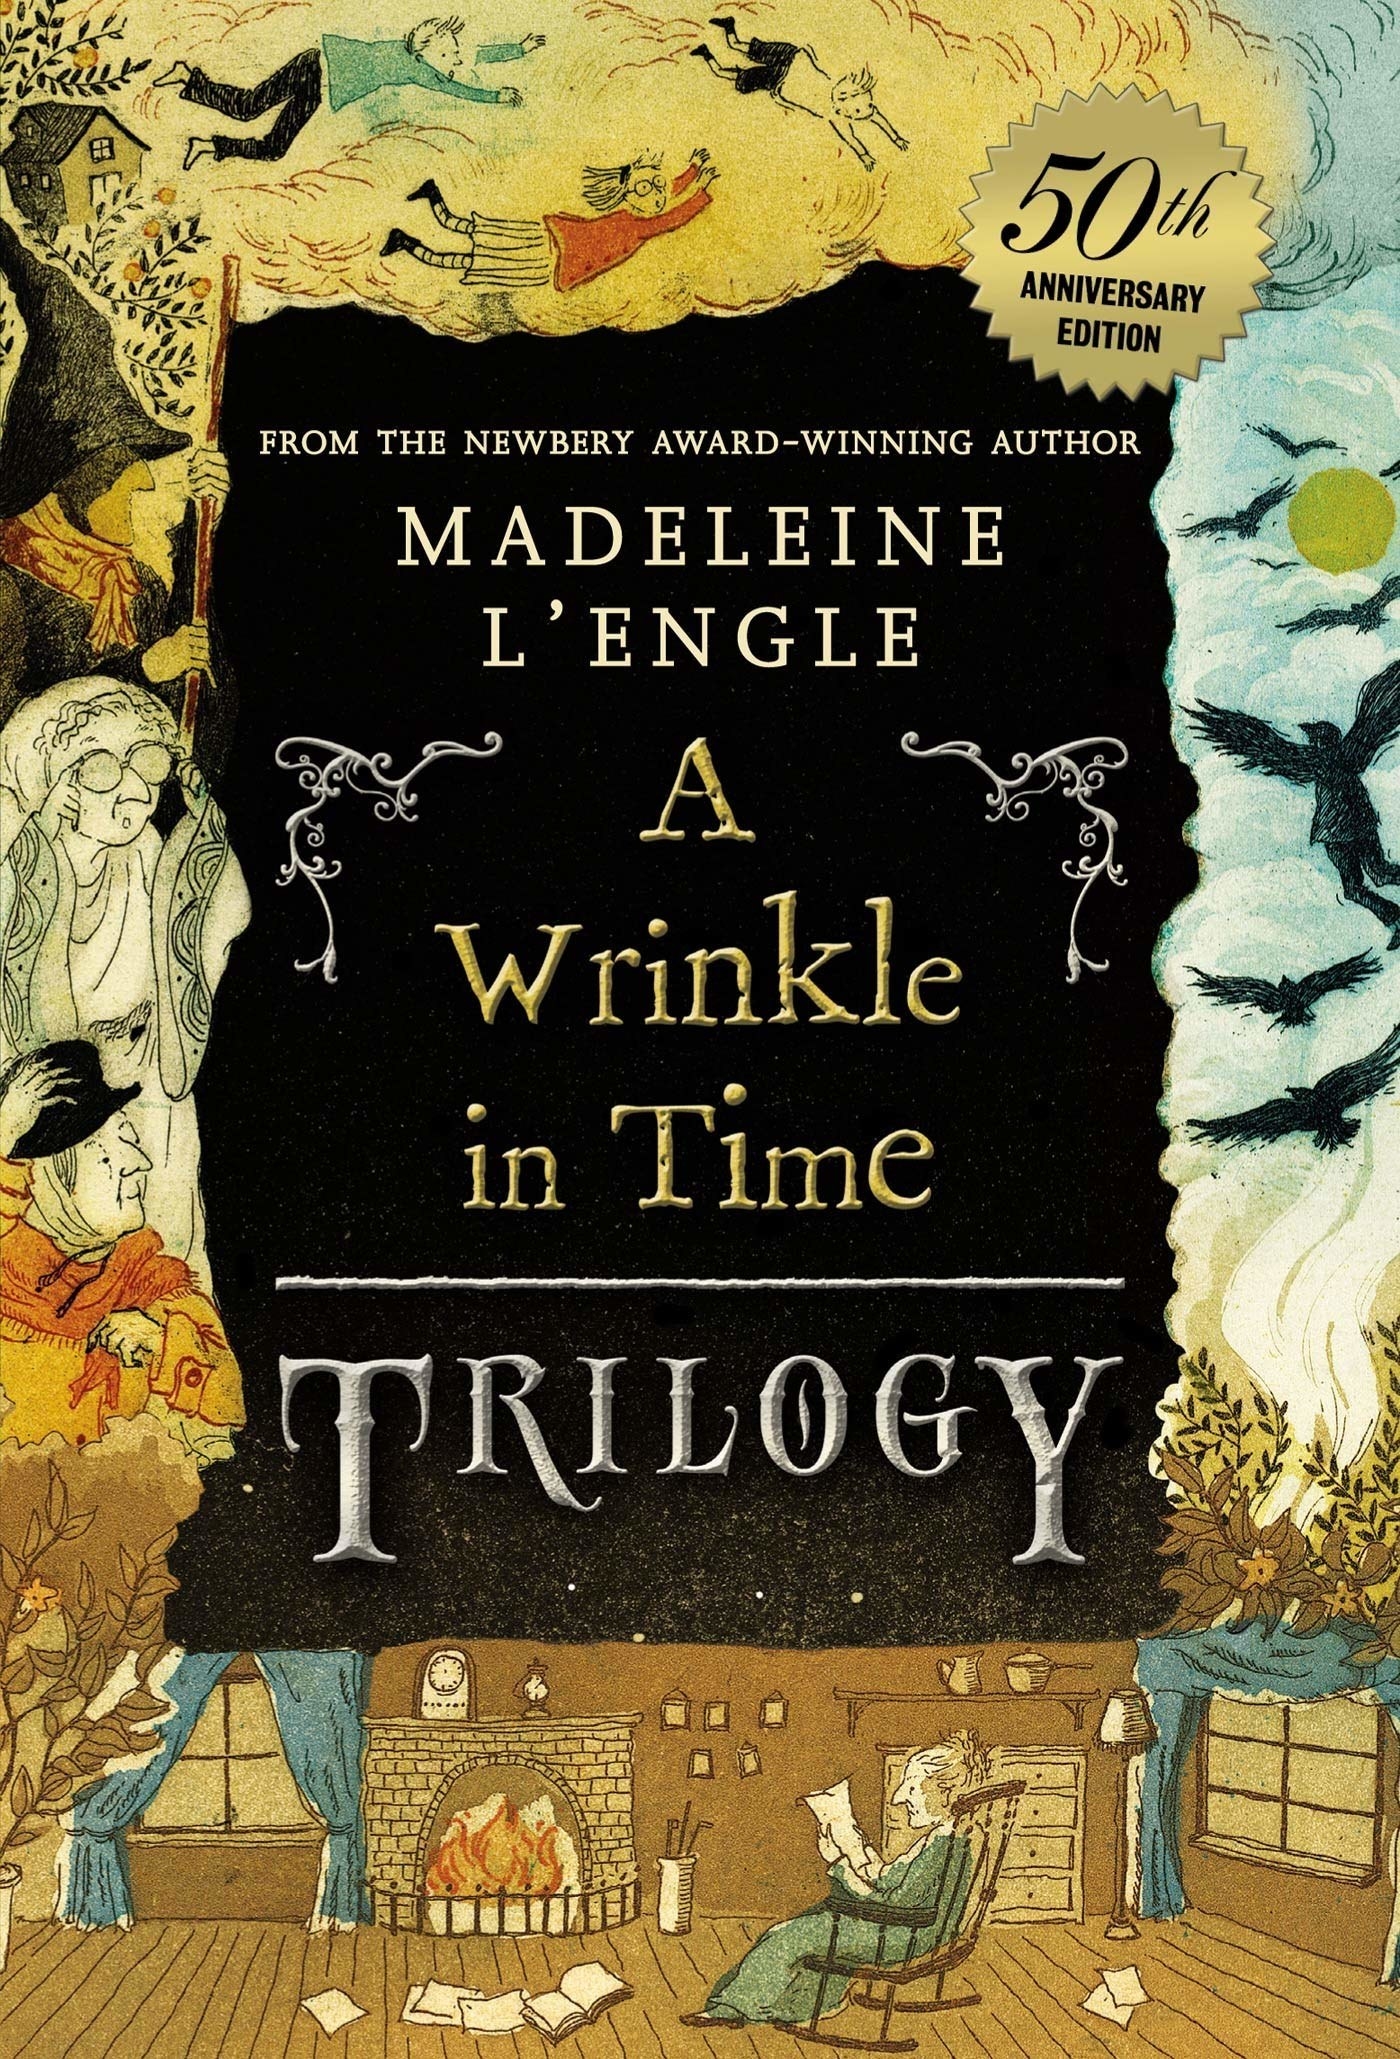 The cover of &quot;A Wrinkle In Time&quot; by Madeleine L&#x27;Engle.